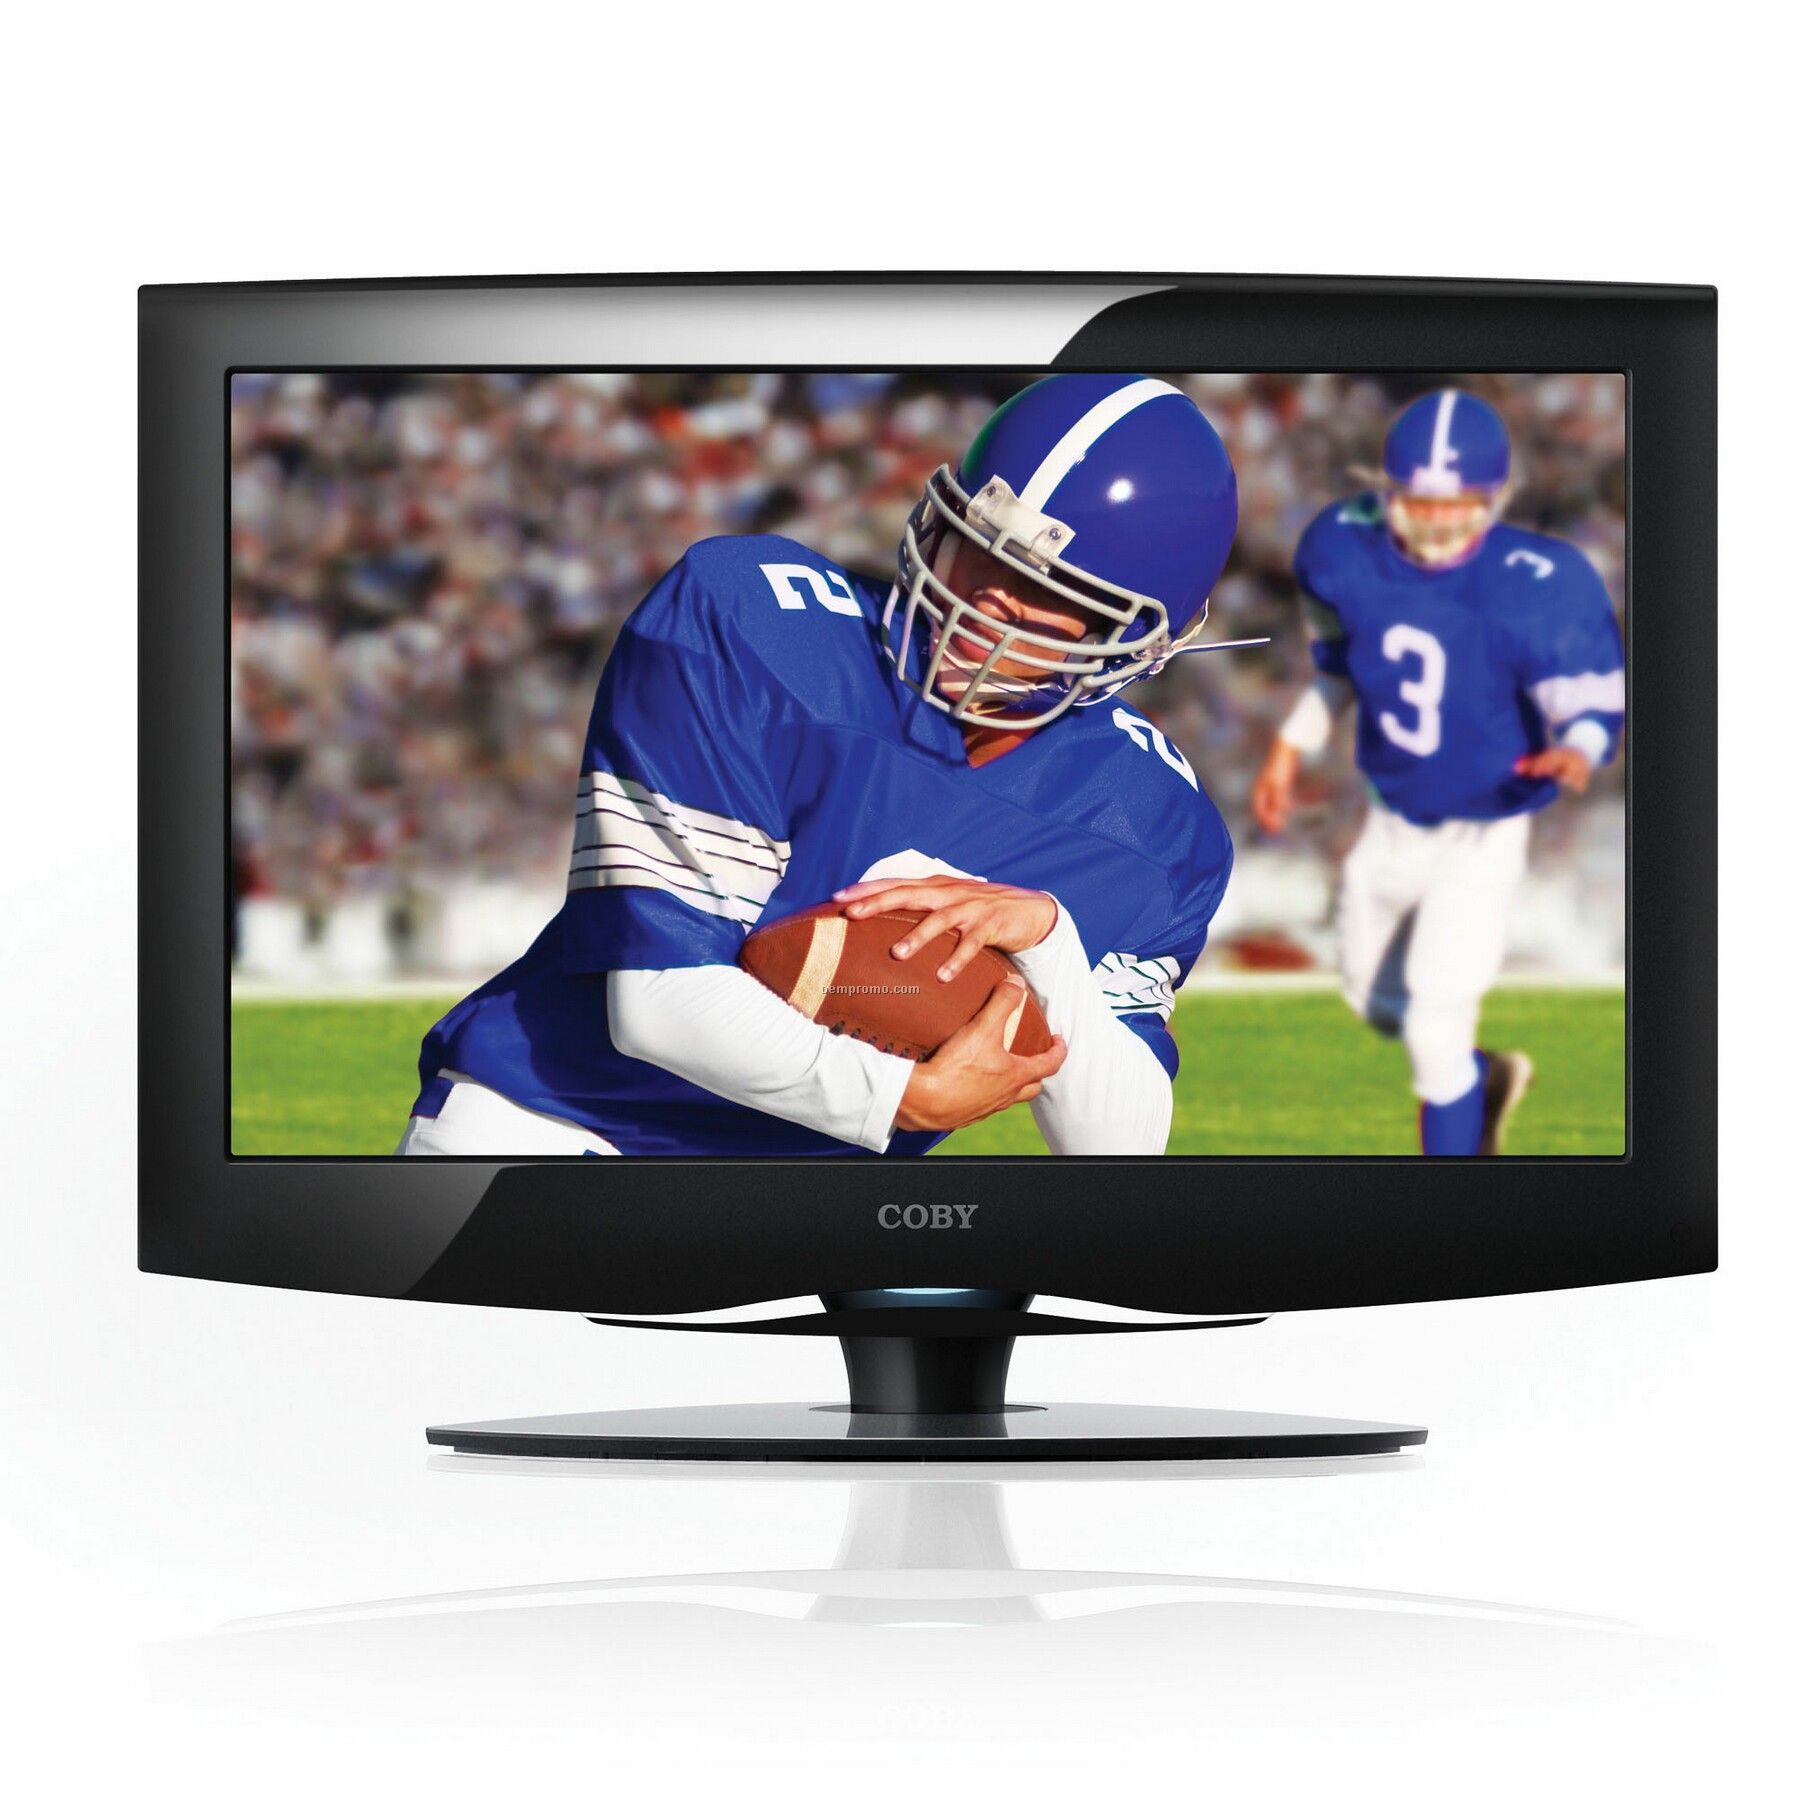 Coby 15" Widescreen Lcd Hdtv